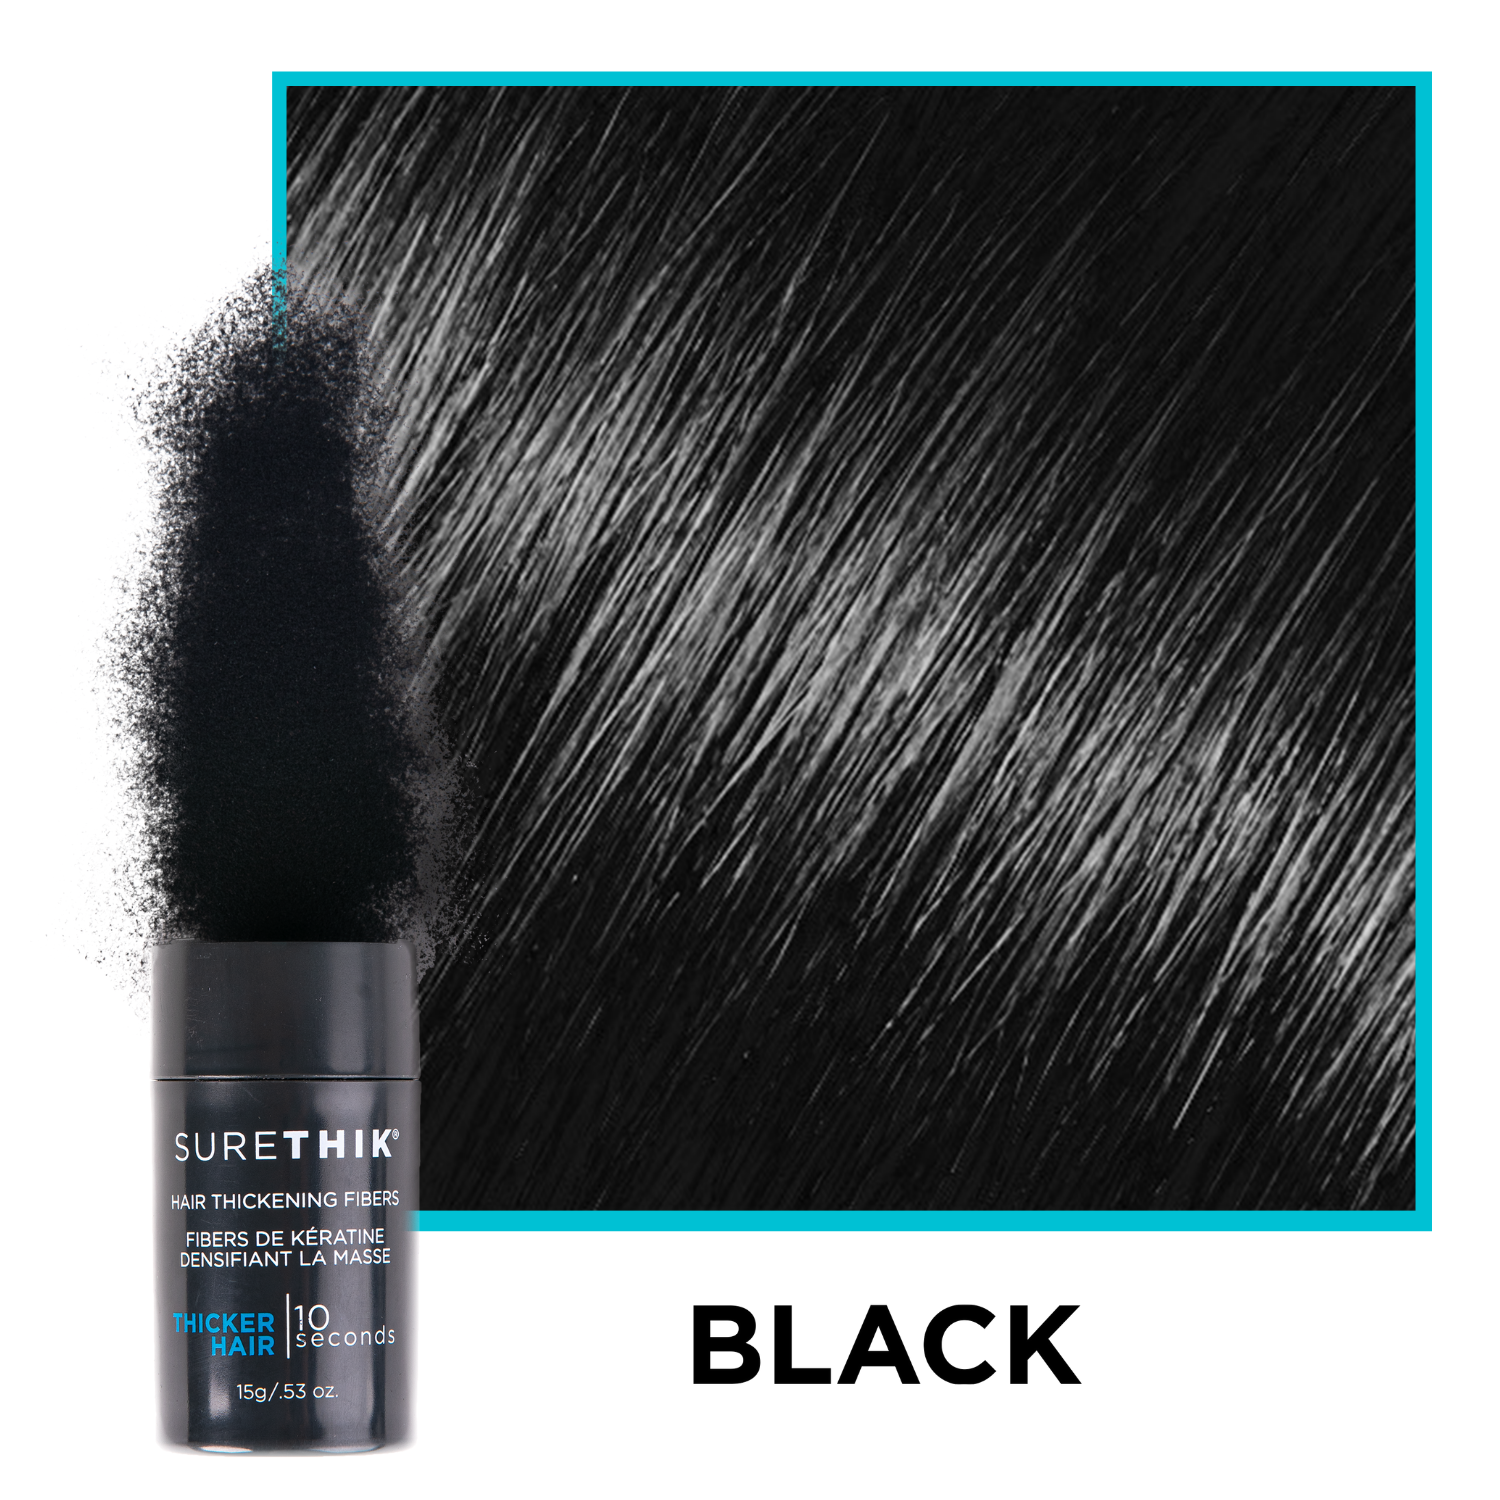 Package of 4 SureThik Hair Thickening Fibers 30g Bottles - Get 4 Bottles for the Price of 3!